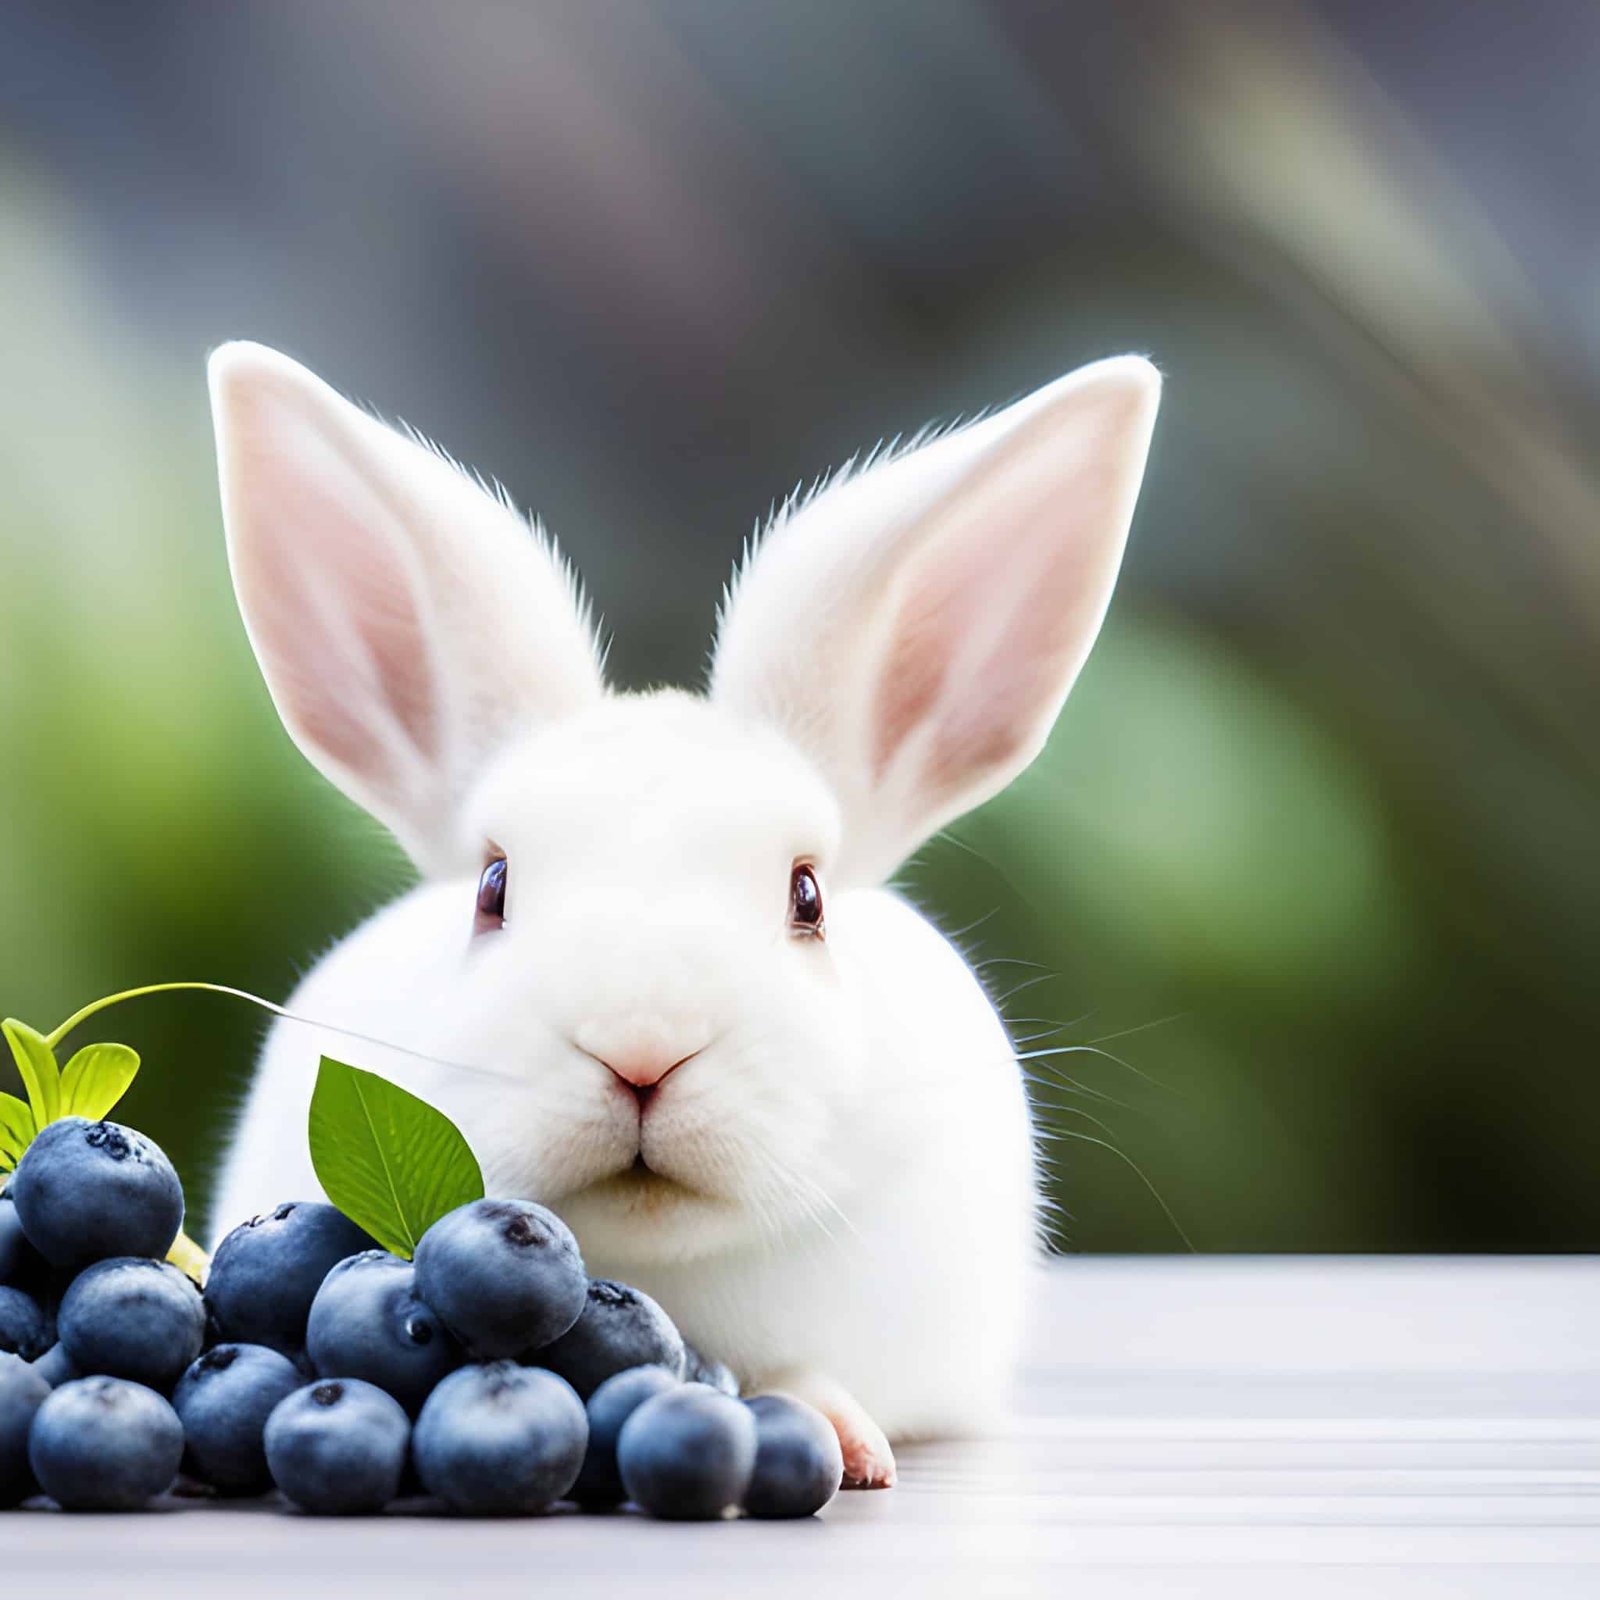 can pet rabbits eat blueberries